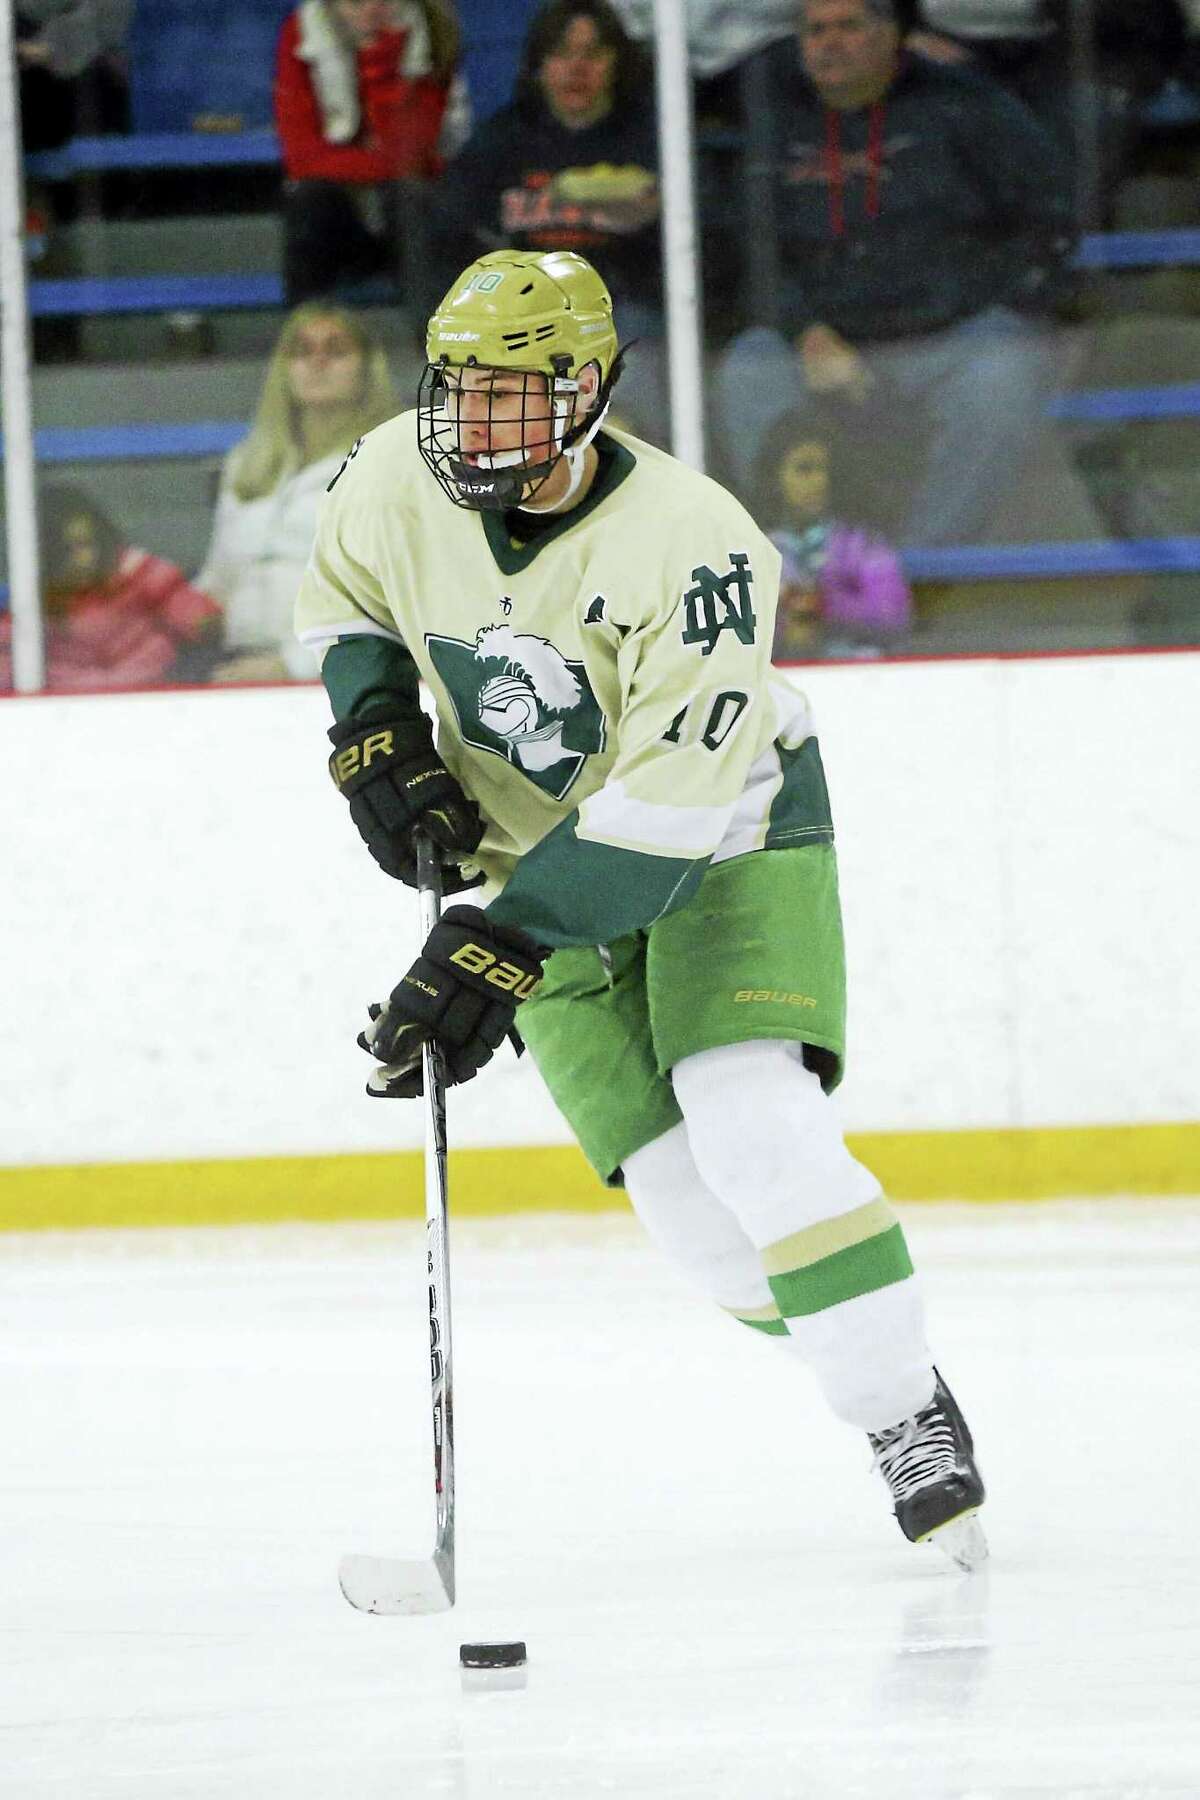 Notre Dame-West Haven defenseman Doug Caliendo scored the deciding goal 25 seconds into overtime in Notre Dame’s 3-2 win over Northwest Catholic Wednesday.